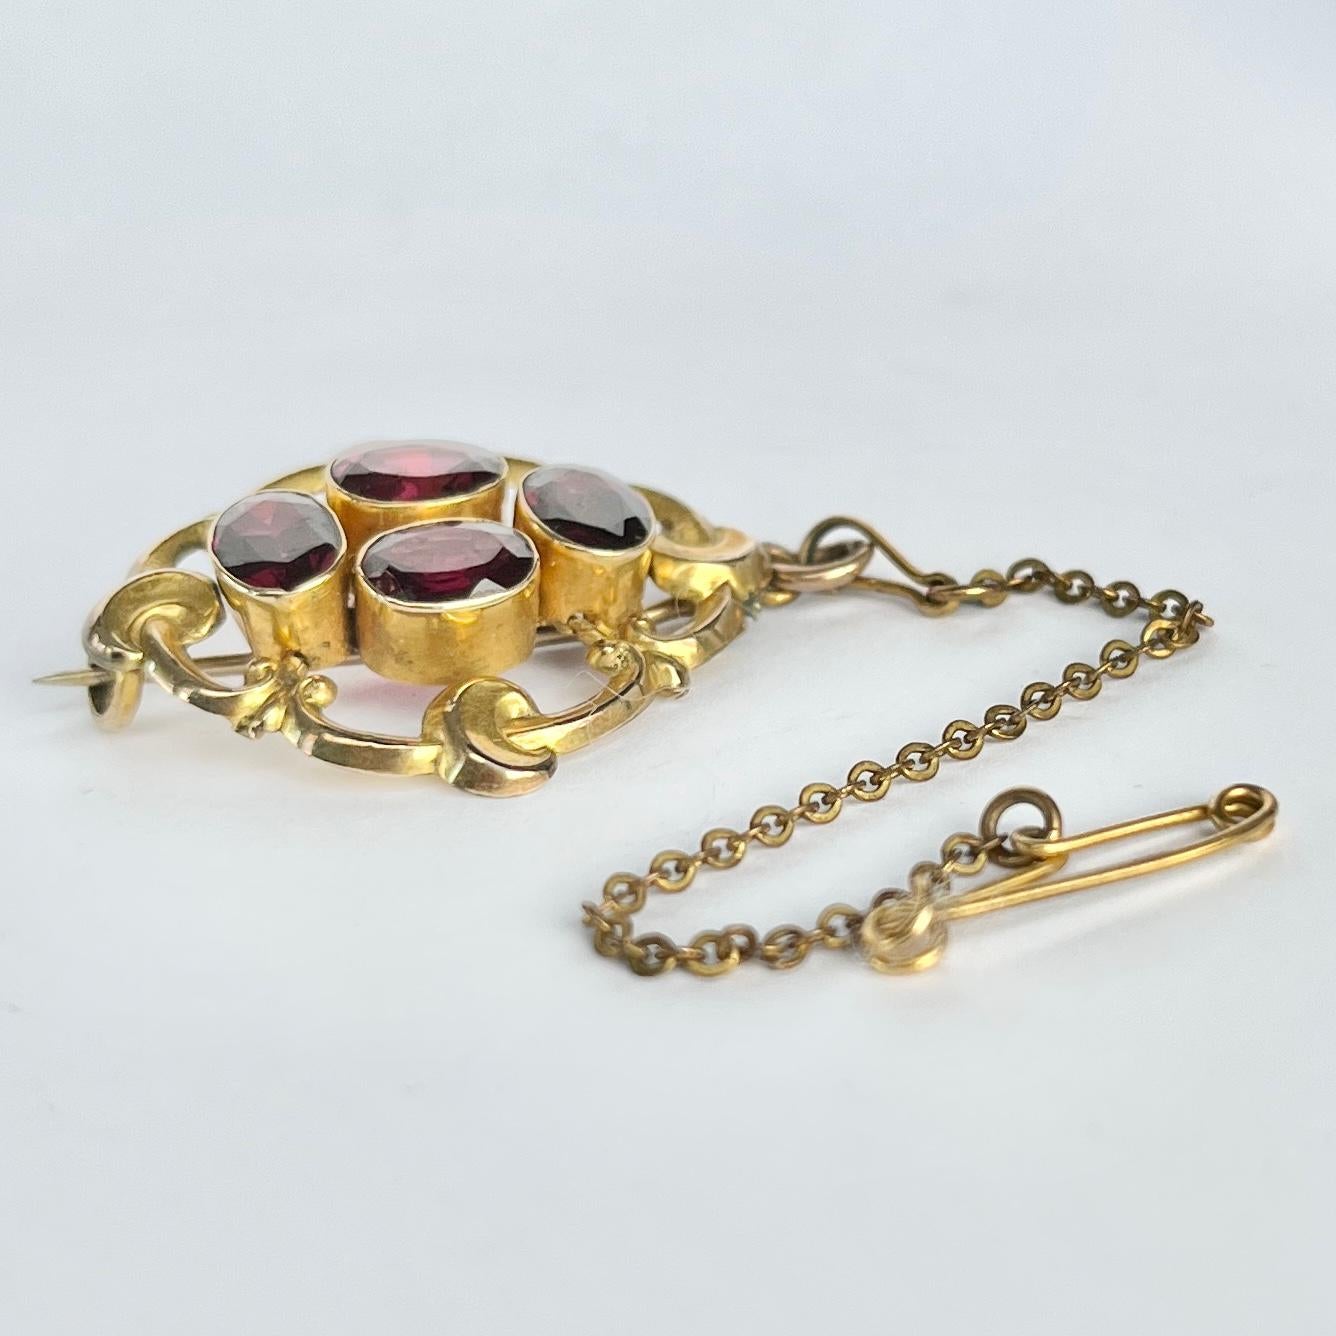 Victorian Almandine Garnet and 9carat Gold Brooch In Good Condition For Sale In Chipping Campden, GB